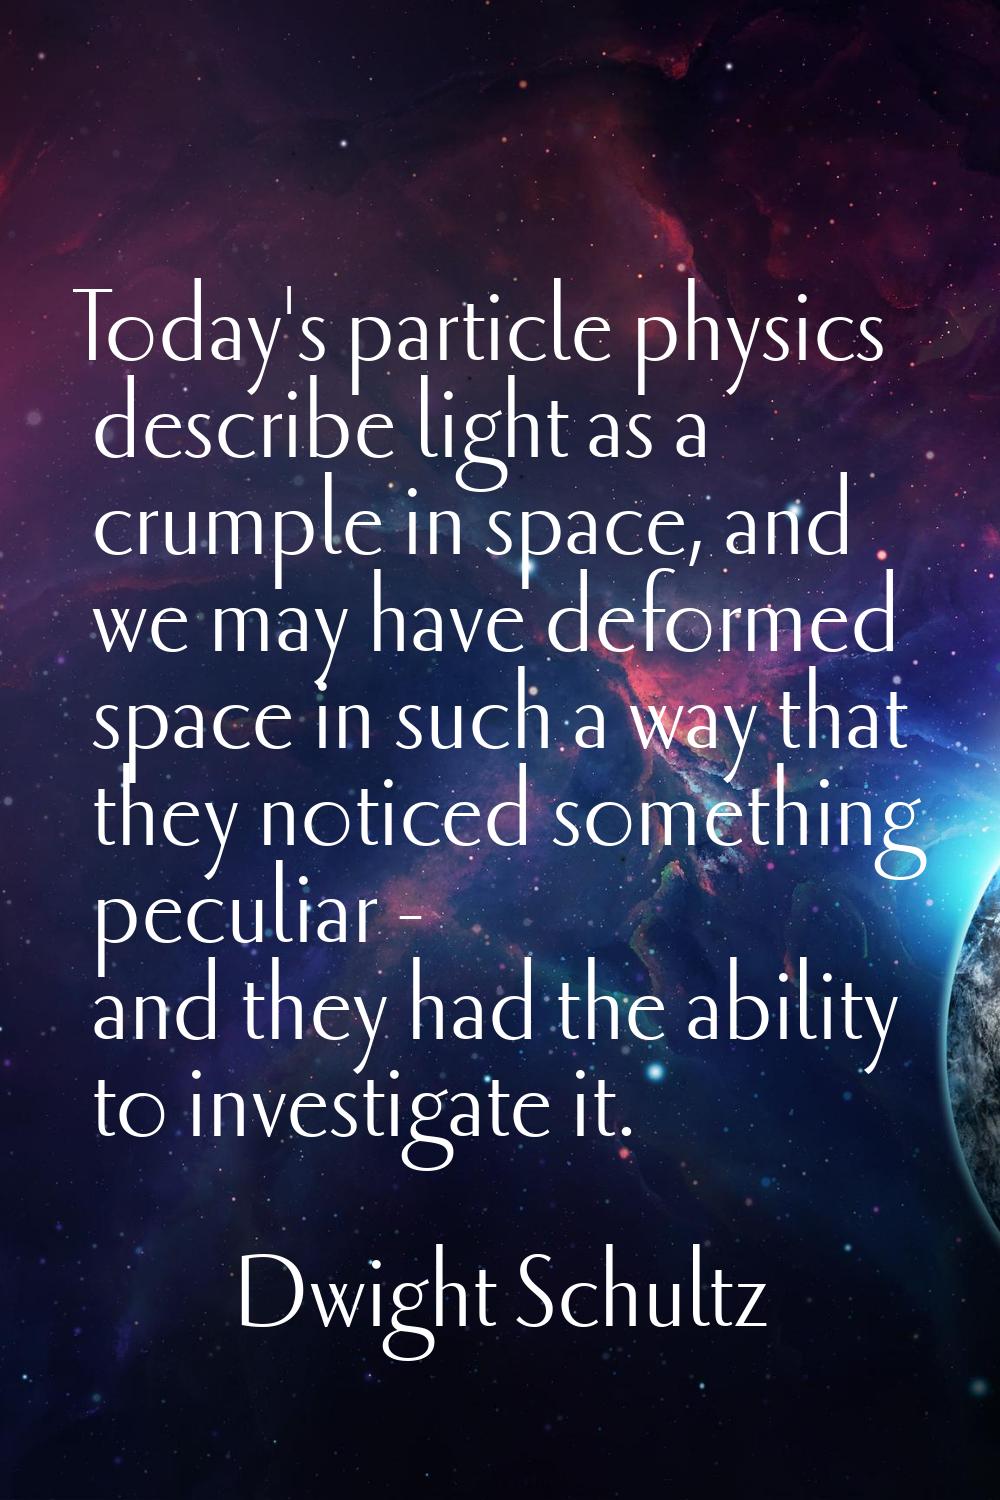 Today's particle physics describe light as a crumple in space, and we may have deformed space in su